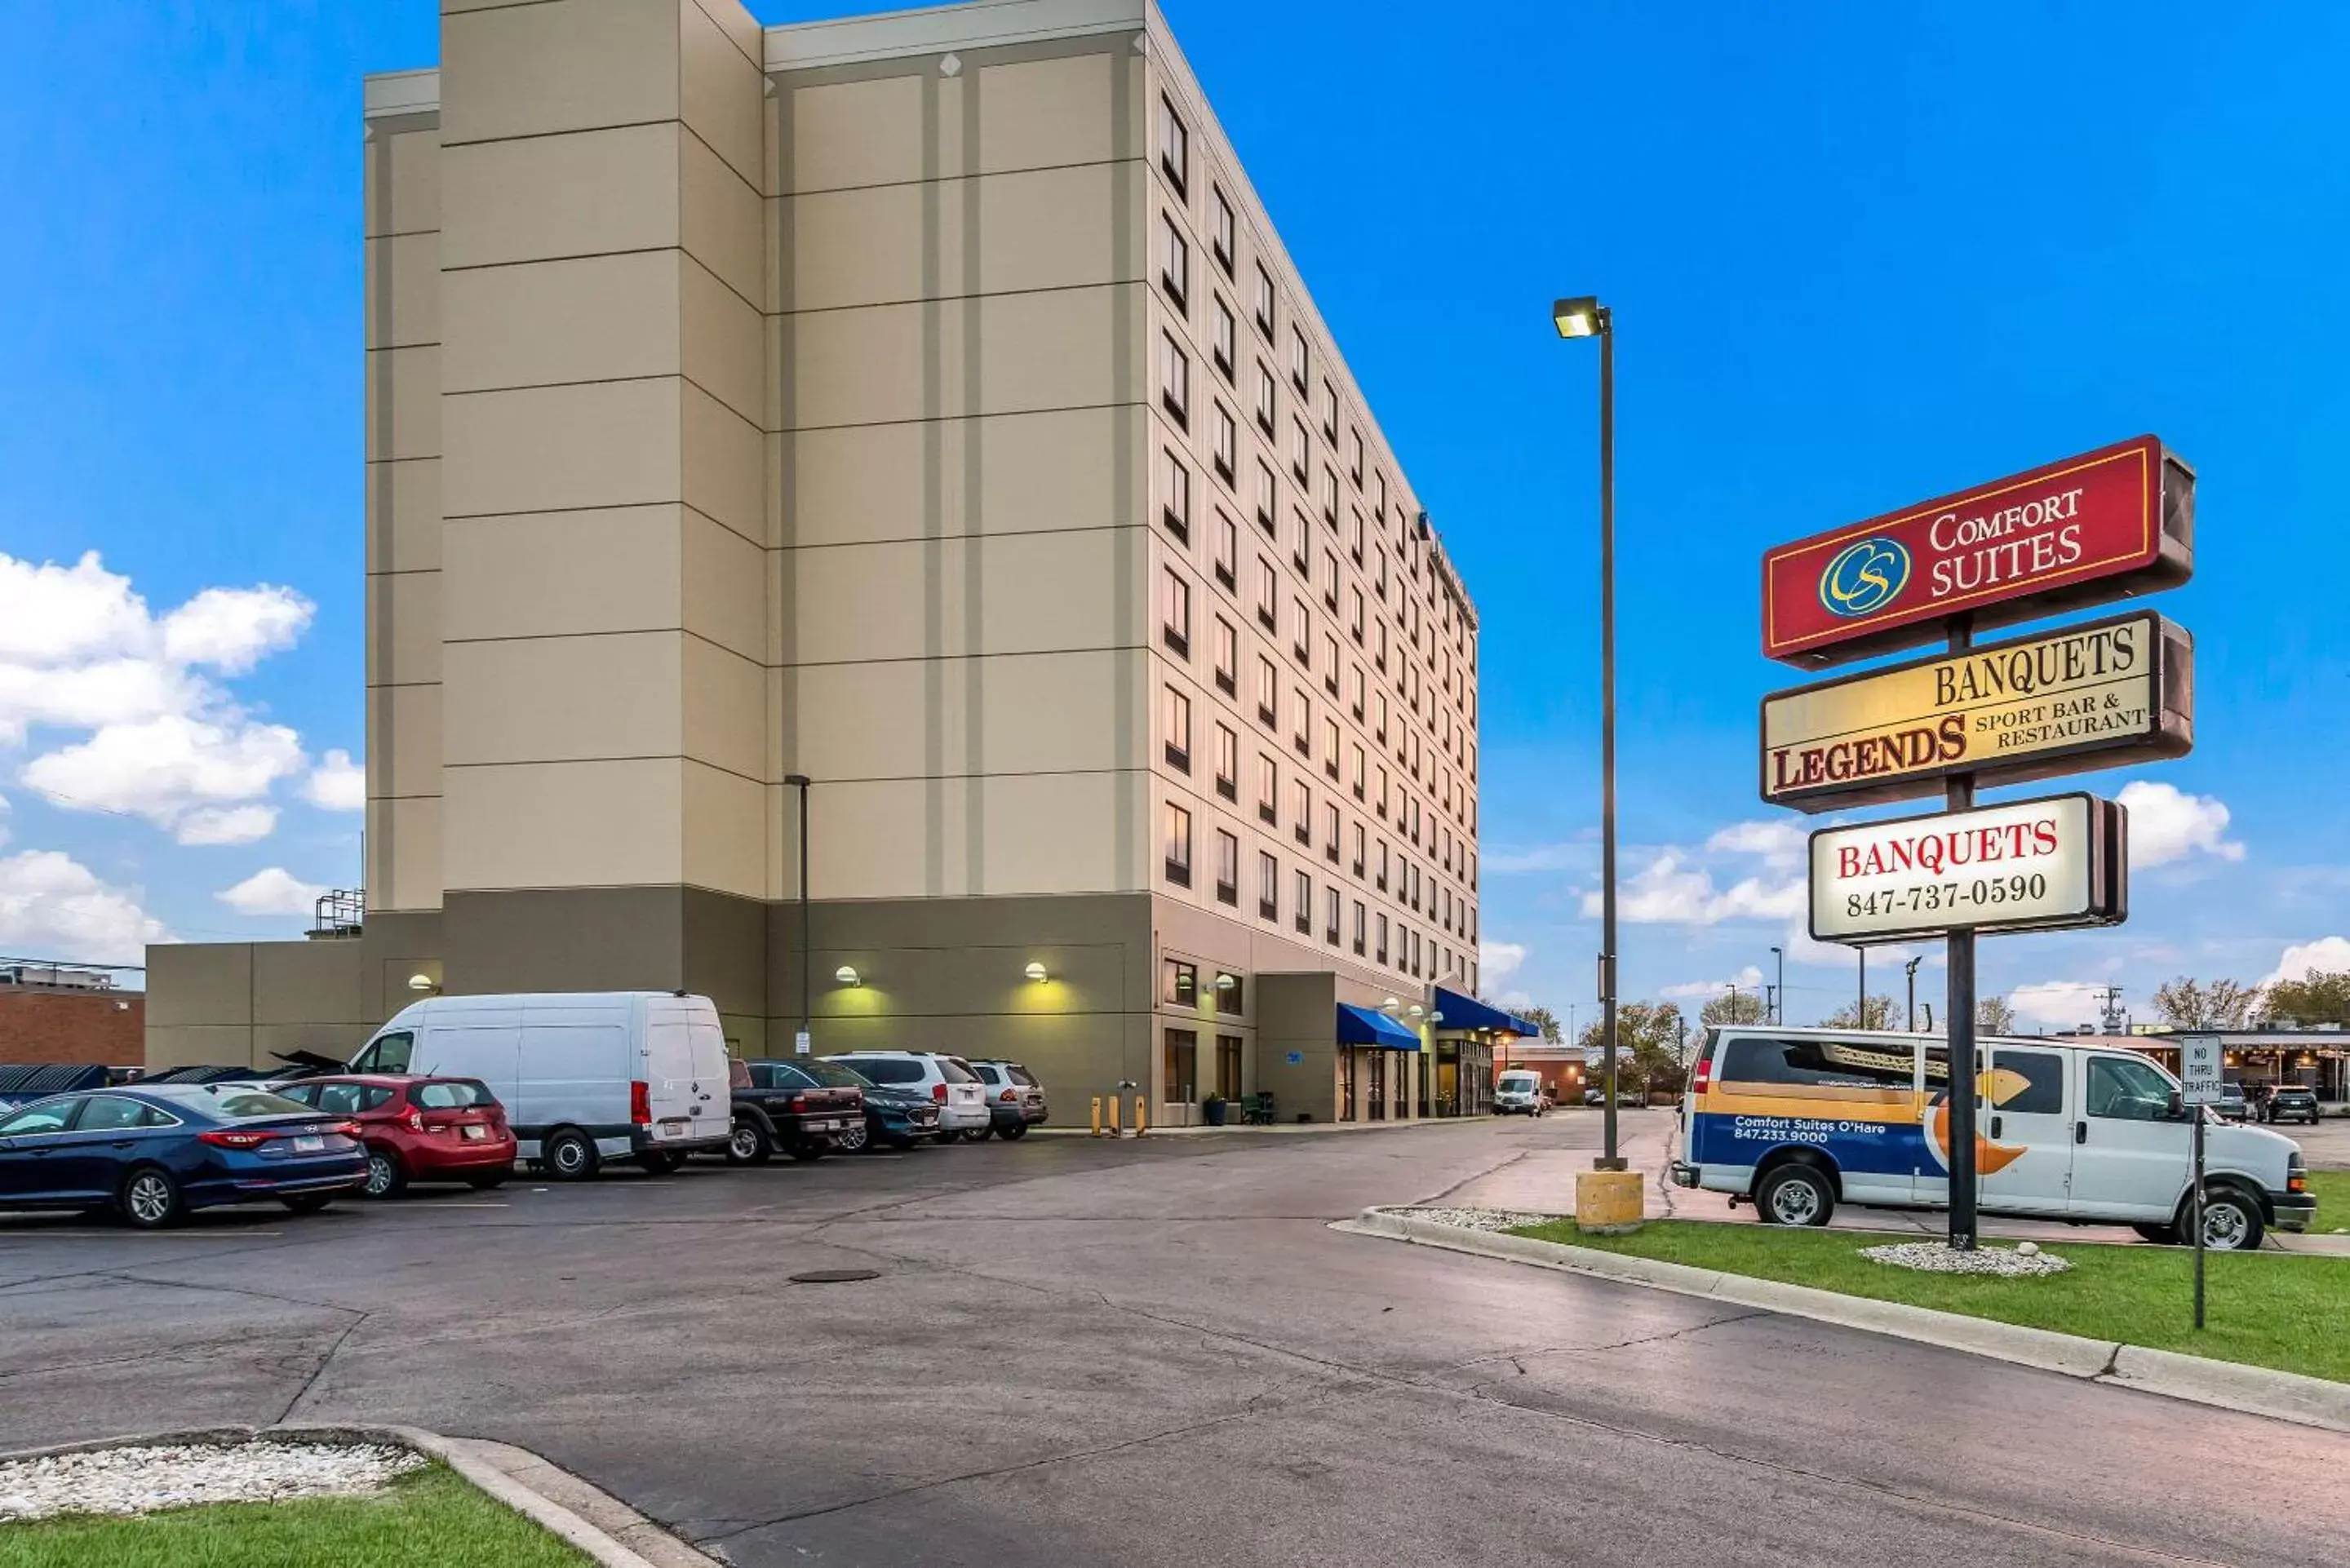 Property building in Comfort Suites Chicago O'Hare Airport